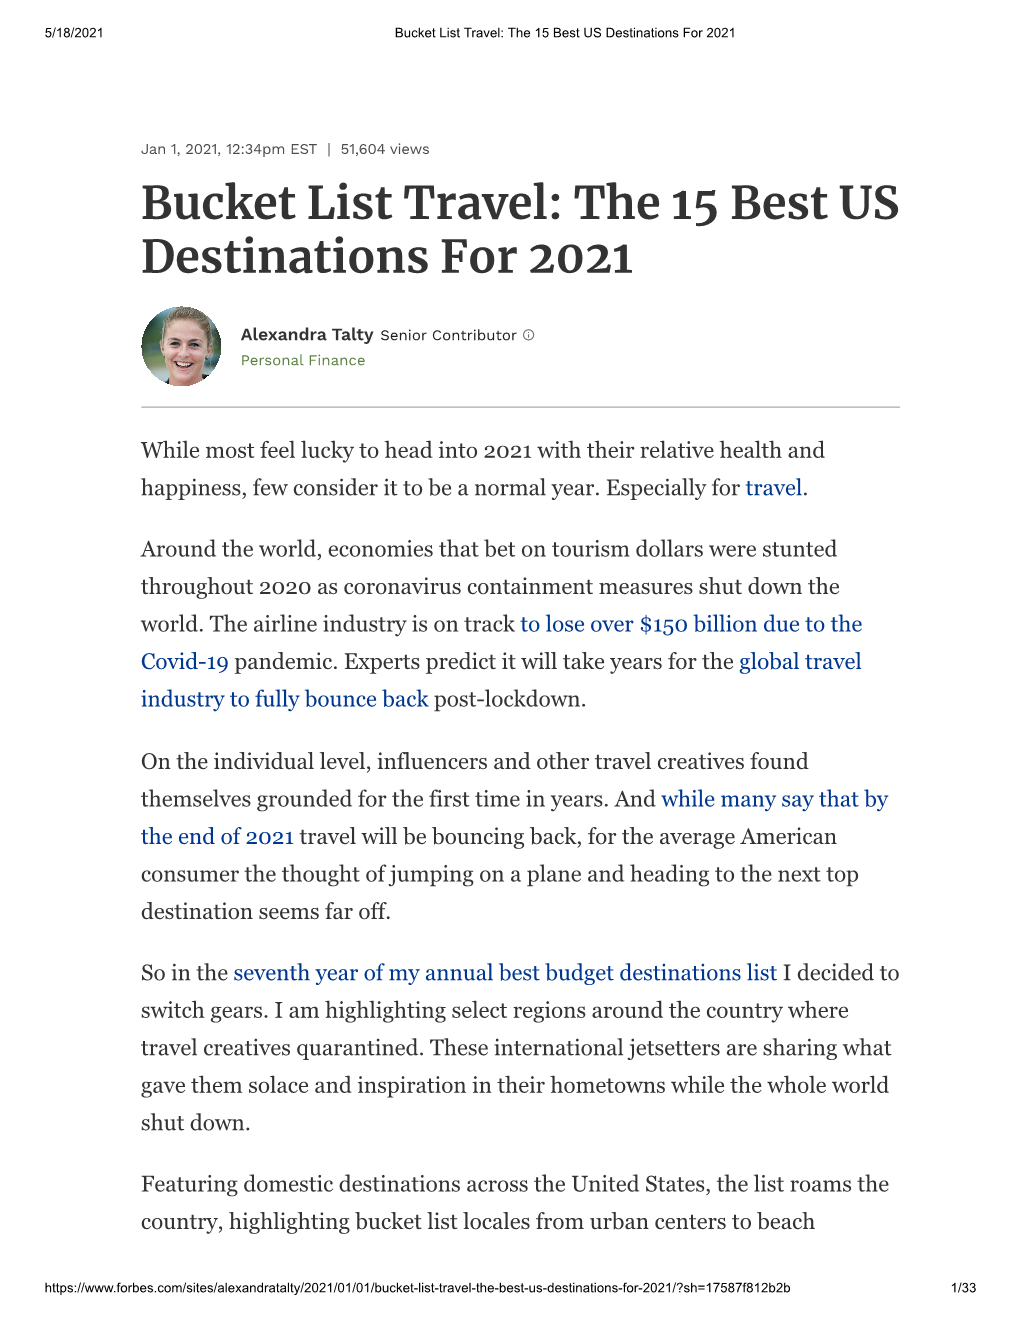 Bucket List Travel: the 15 Best US Destinations for 2021